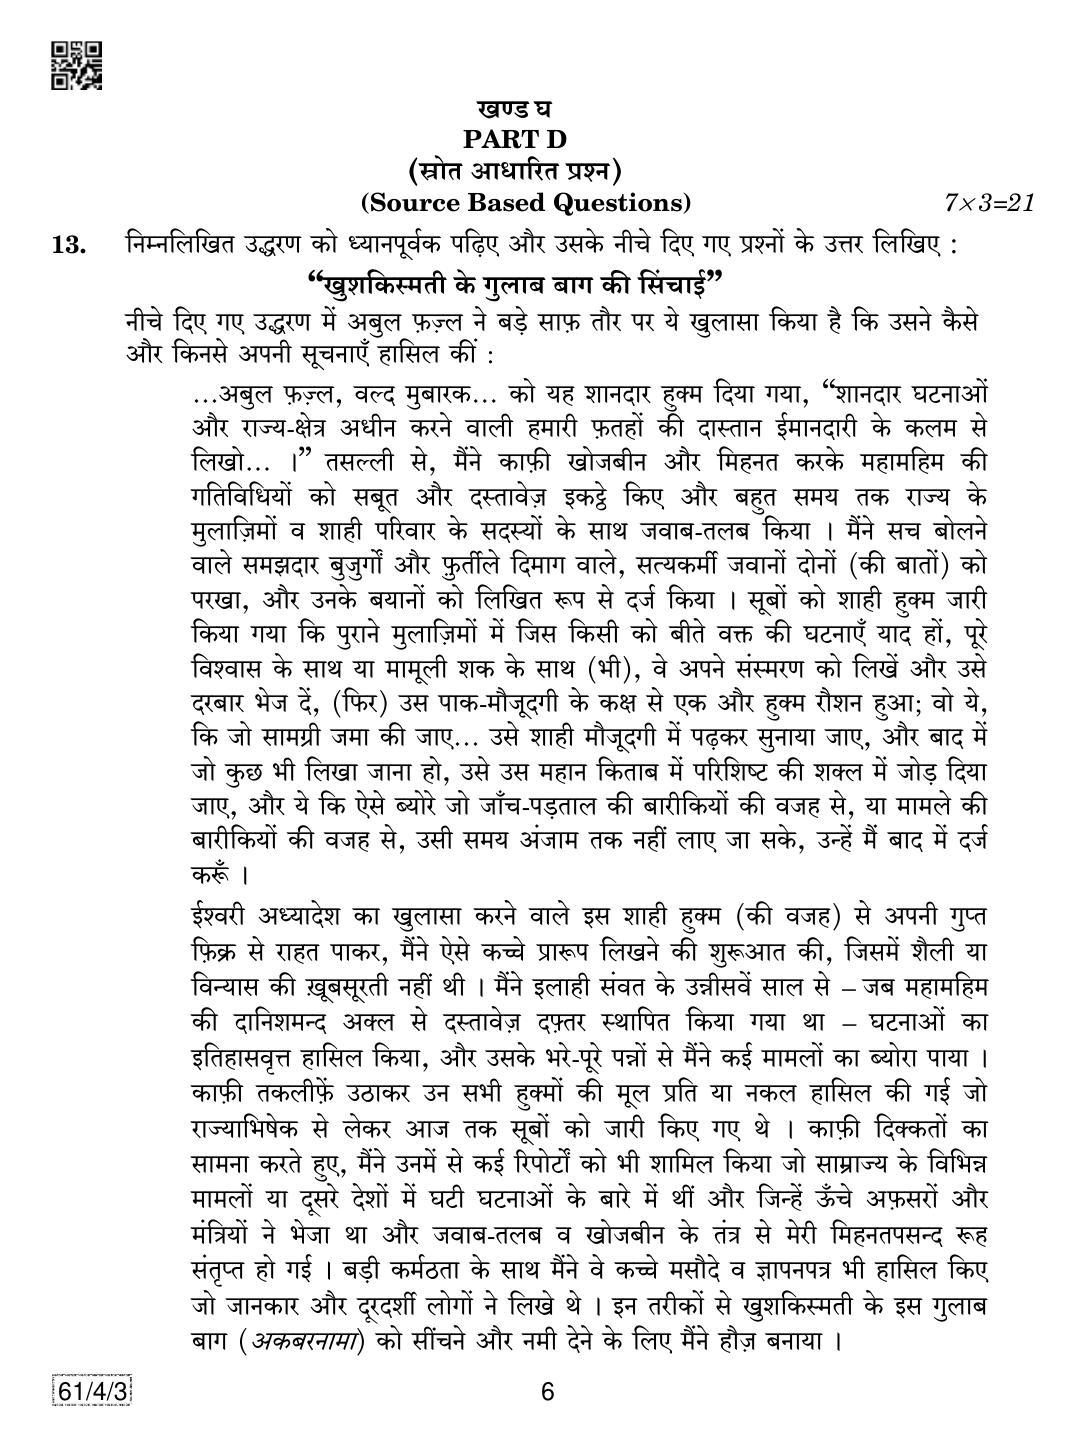 CBSE Class 12 61-4-3 History 2019 Question Paper - Page 6